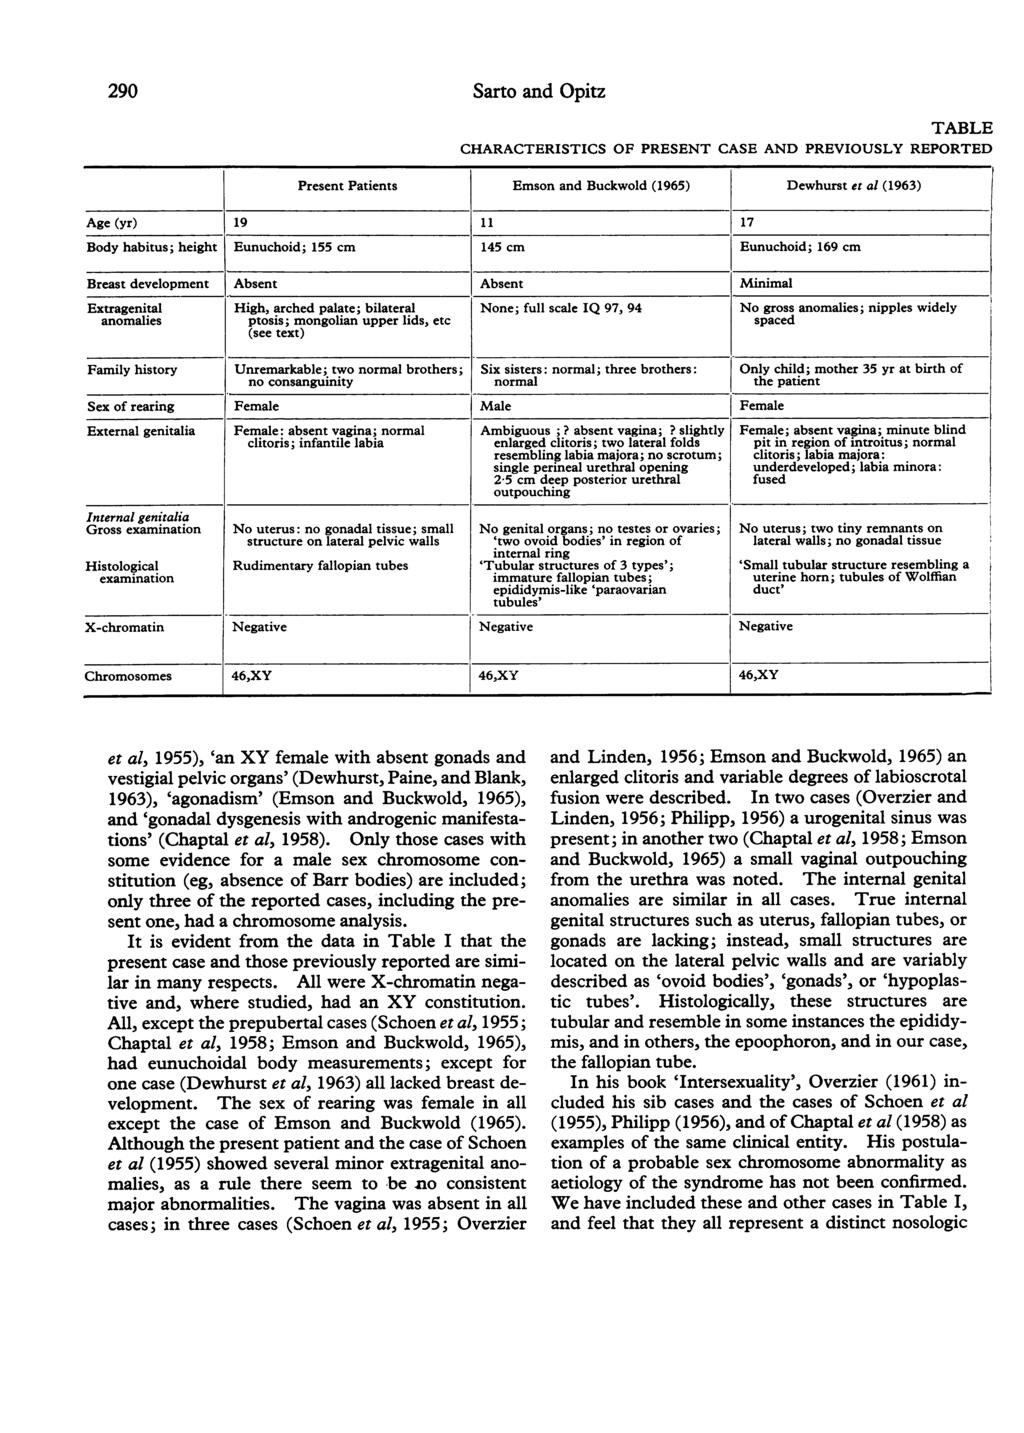 290 TABLE CHARACTERISTICS OF PRESENT CASE AND PREVIOUSLY REPORTED Present Patients Emson and Buckwold (1965) Dewhurst et al (1963) Age (yr) 19 11 17 Body habitus; height Eunuchoid; 155 cm 145 cm